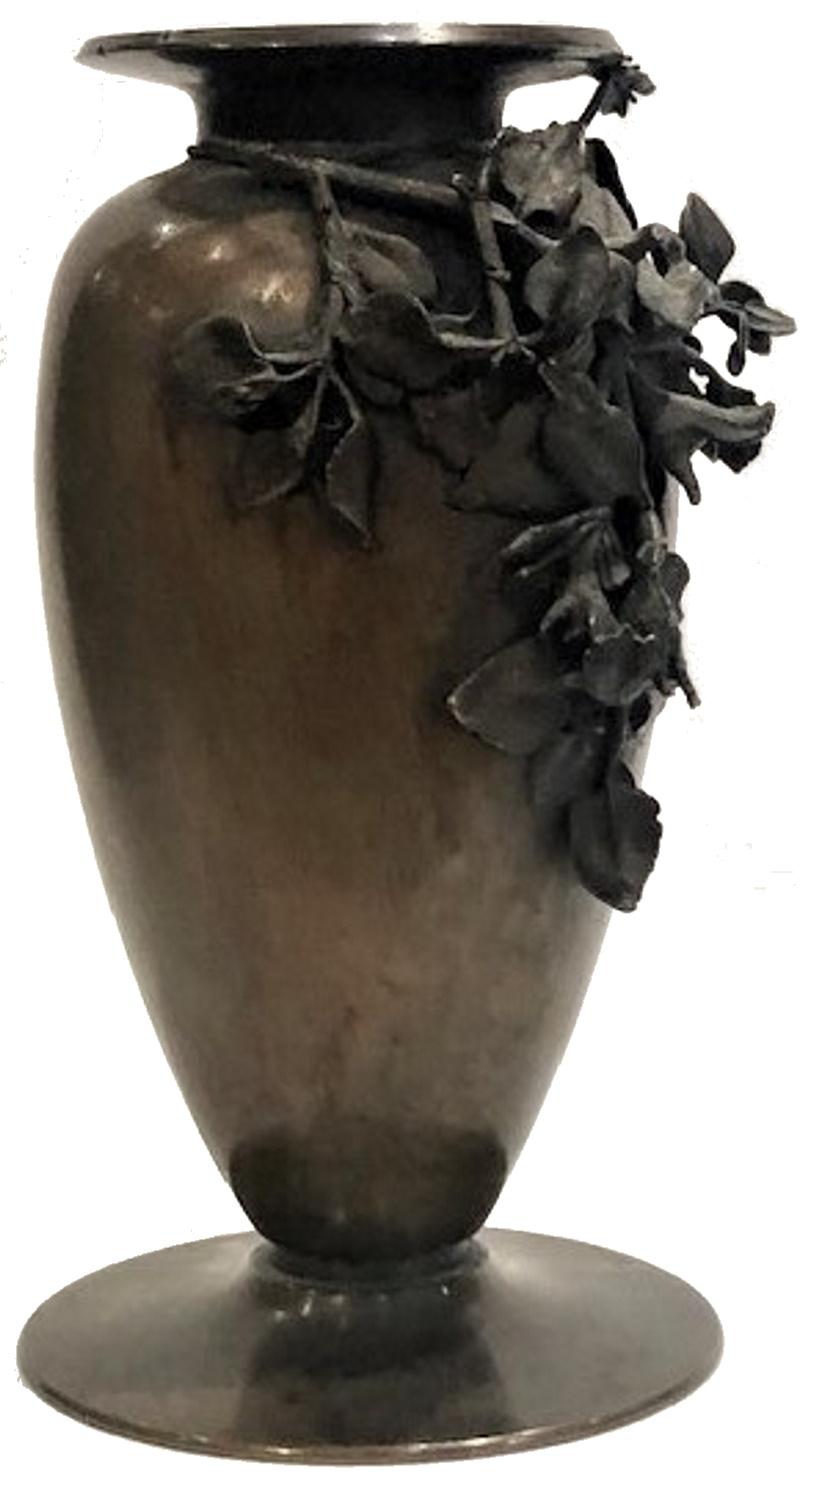 This amazingly elegant bronze vase, the only decoration of which is a bunch of flowers, is a striking example of Italian applied art of the late 19th century, at the junction of two dominant art movements of that era - Aestheticism and